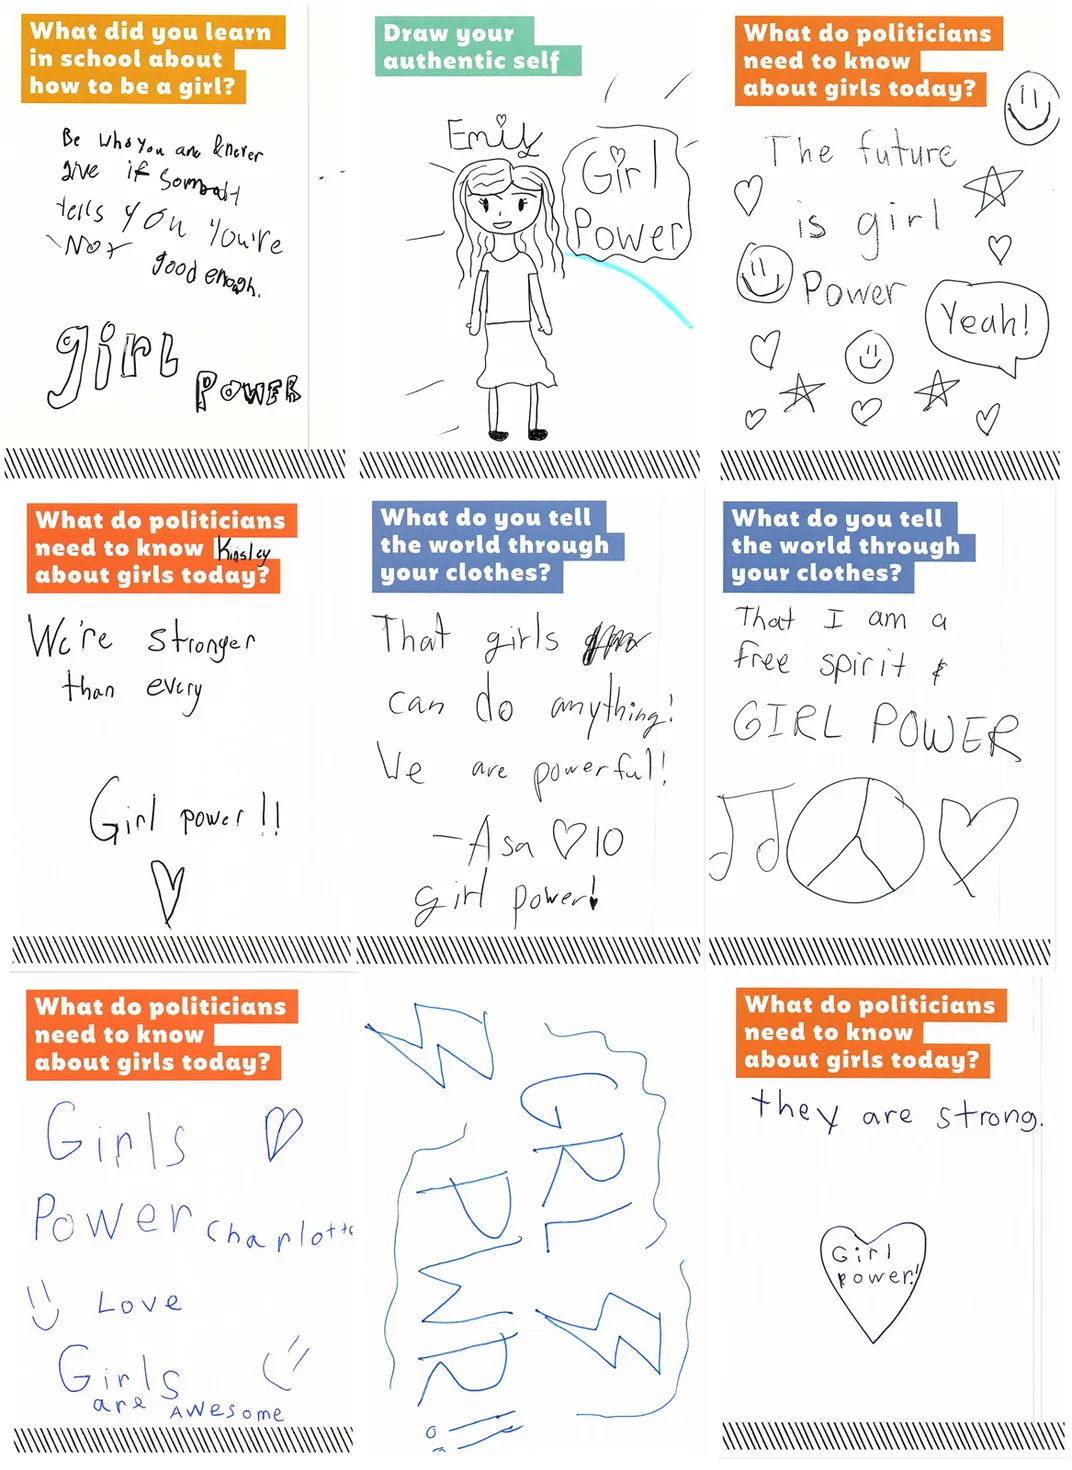 Nine cards with messages from younger visitors. Asa, age 10, responds to the prompt "What do you tell the world through your clothes" with the message "That girls can do anything! We are powerful! . . . Girl Power!"